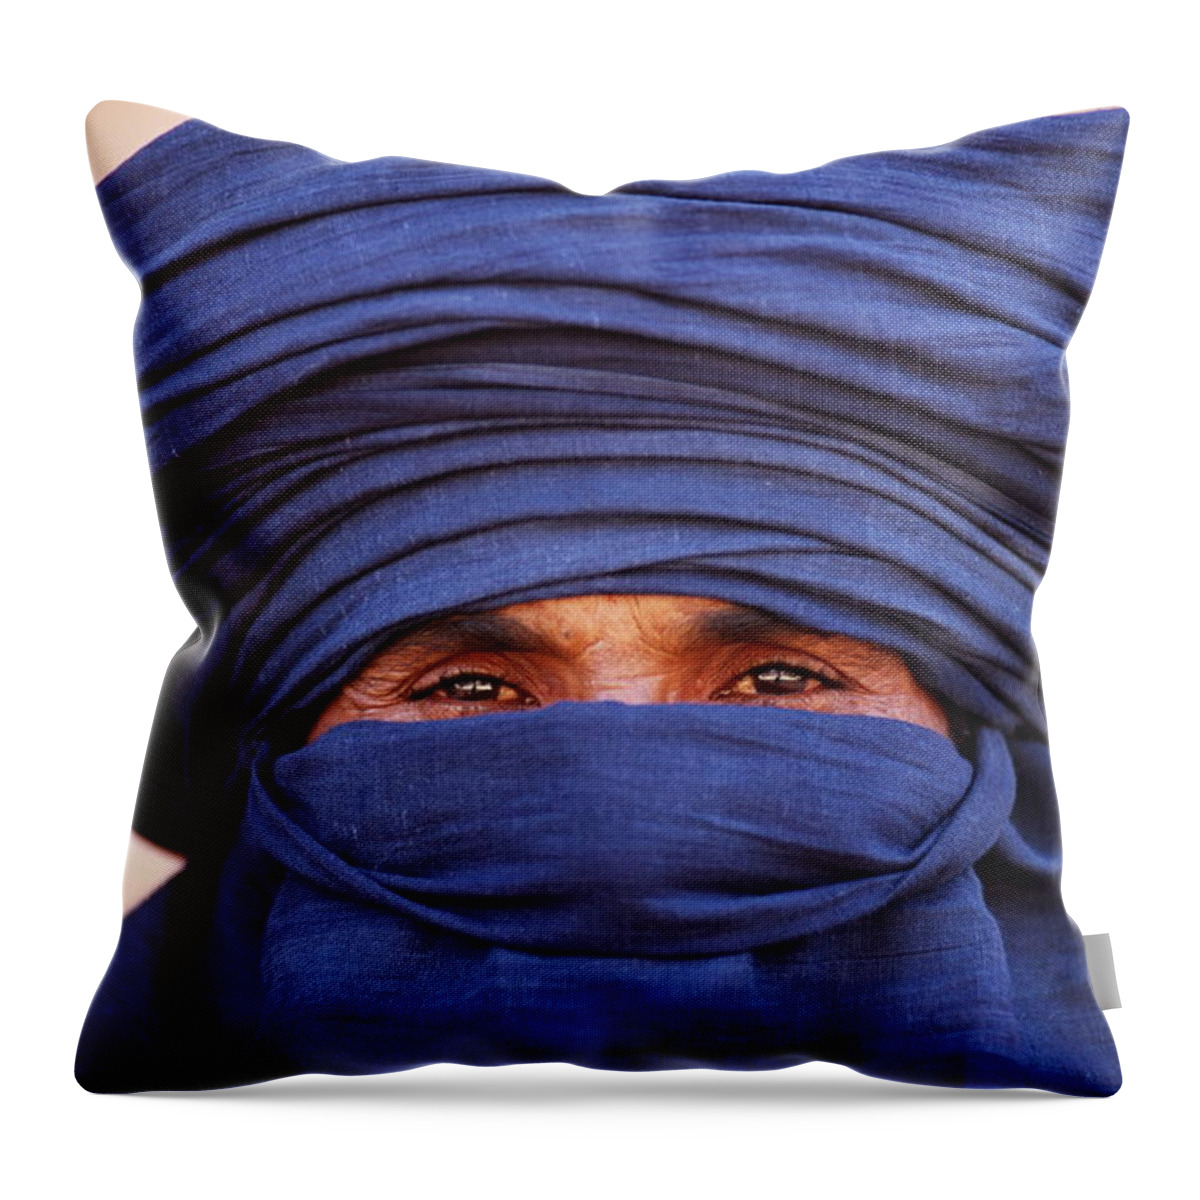 People Throw Pillow featuring the photograph Close-up Of Tuareg, Sahara, Algeria by Frans Lemmens